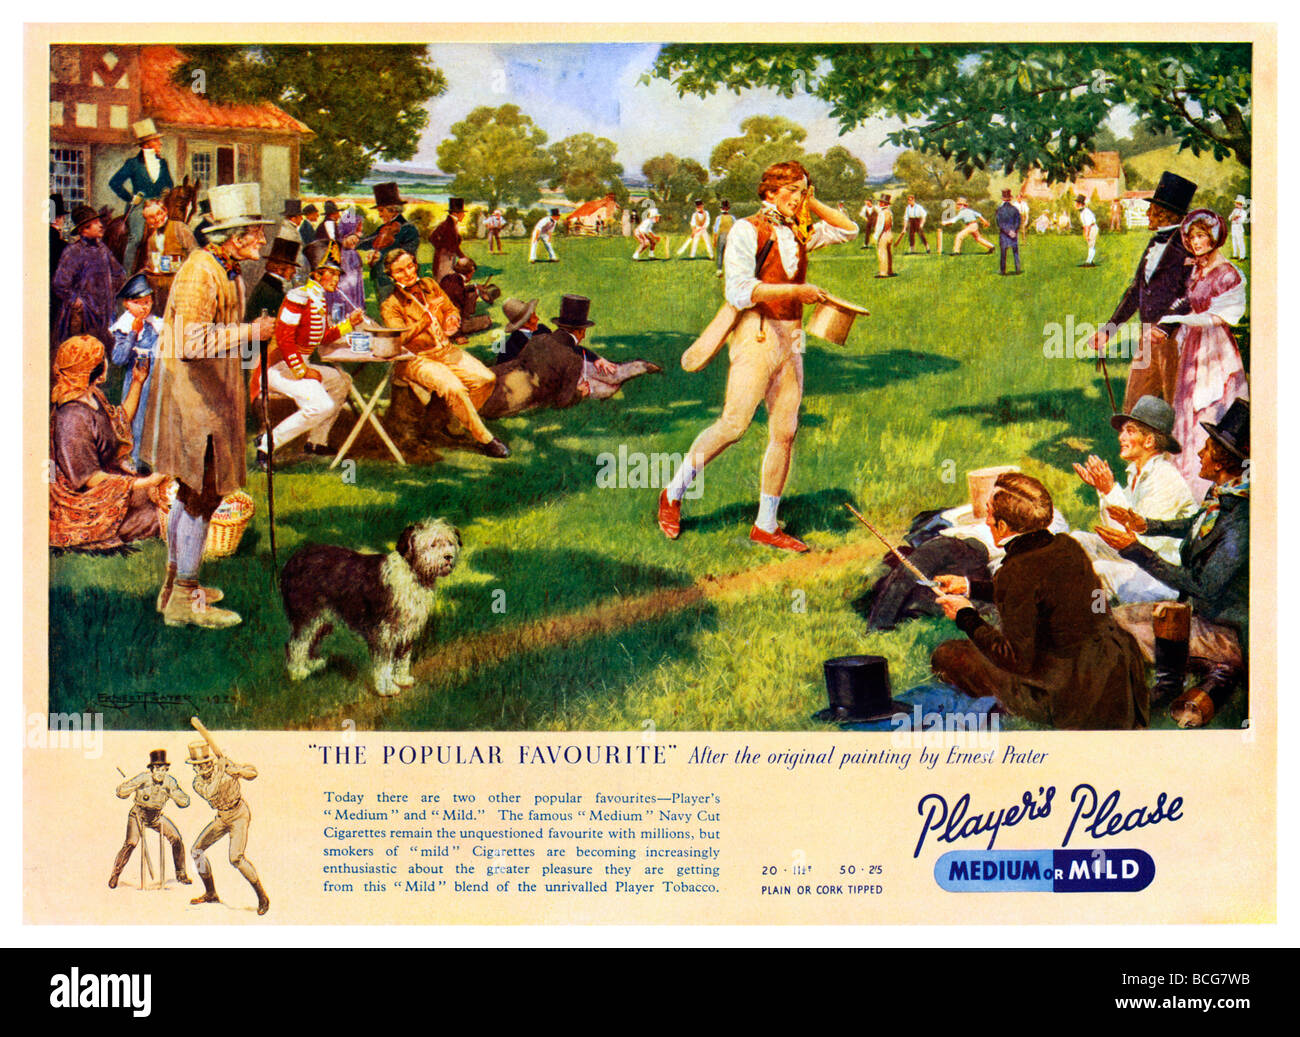 A Popular Favourite 1930s ad for Players cigarettes using the Ernest Prater painting of a Regency game of cricket Stock Photo